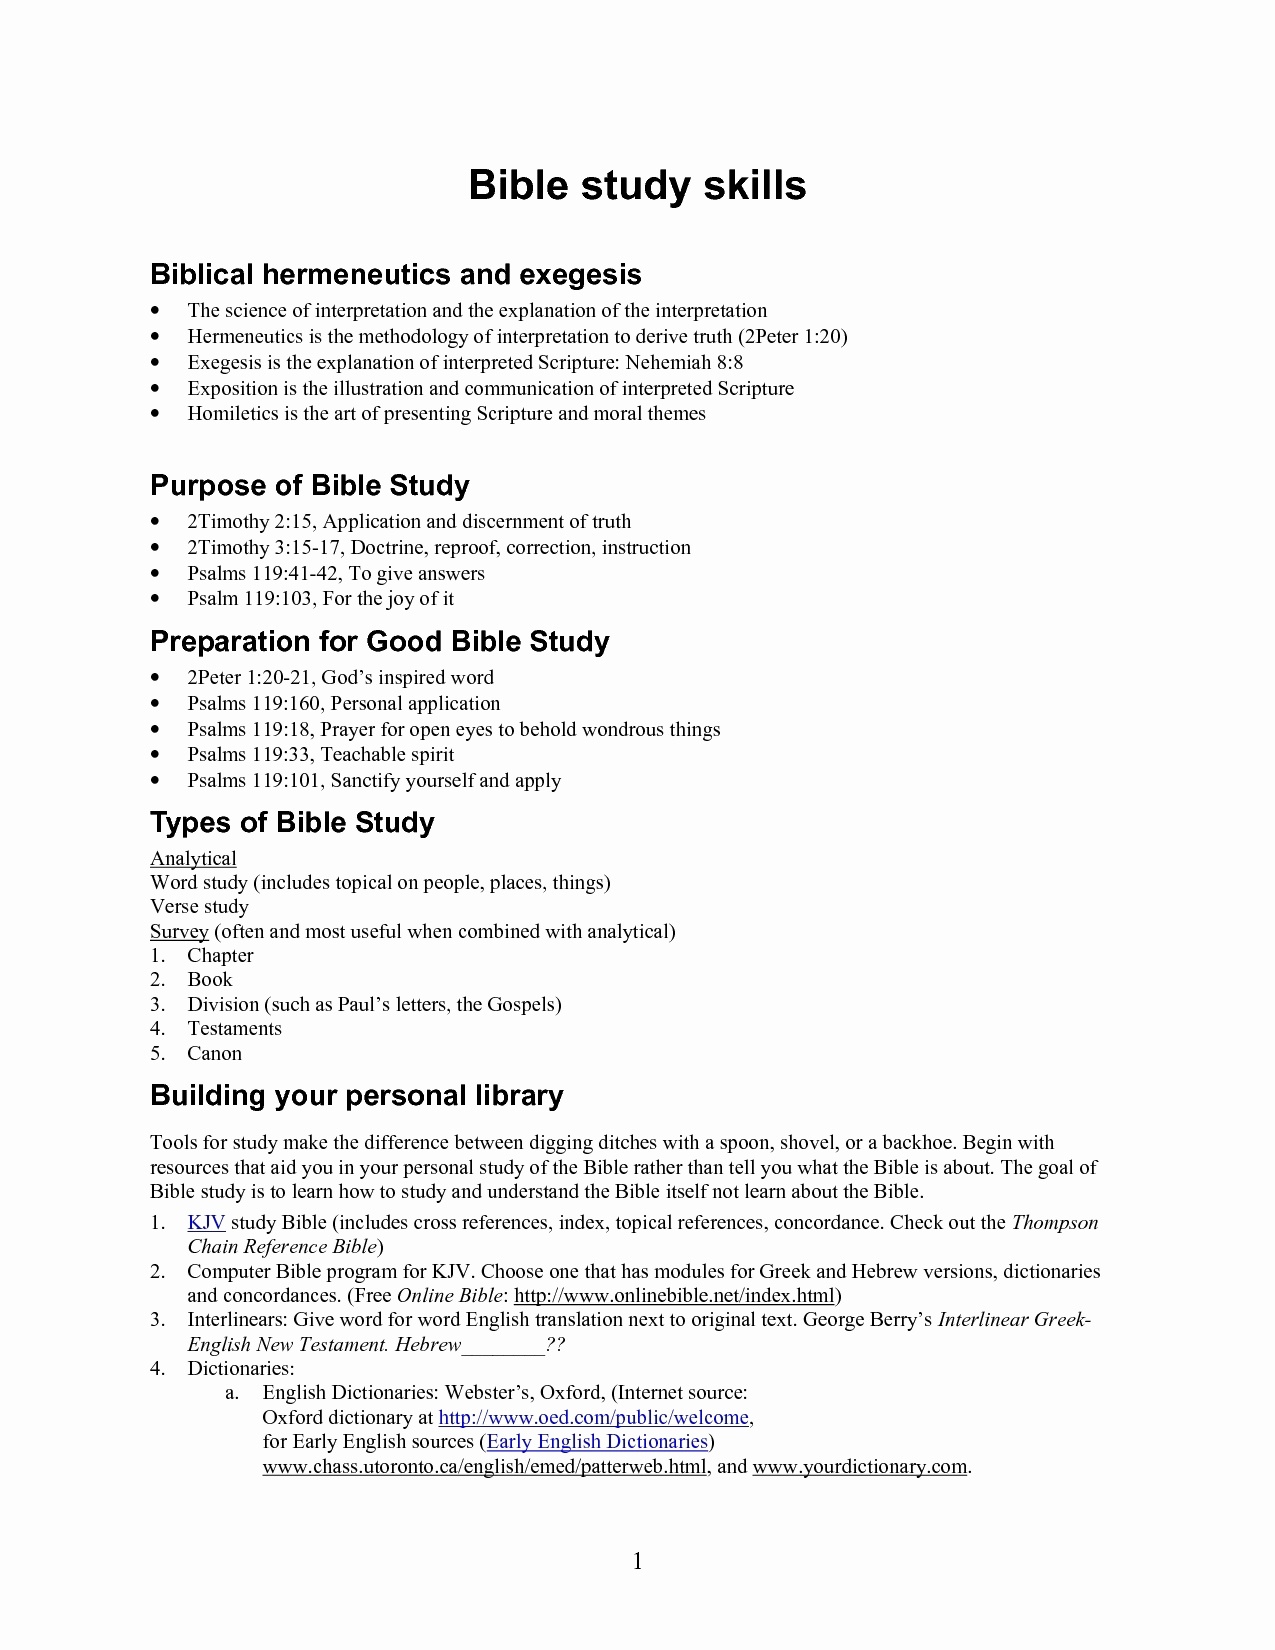 Bible Study Worksheets For Adults – Aggelies-Online.eu - Free Printable Bible Study Lessons For Adults